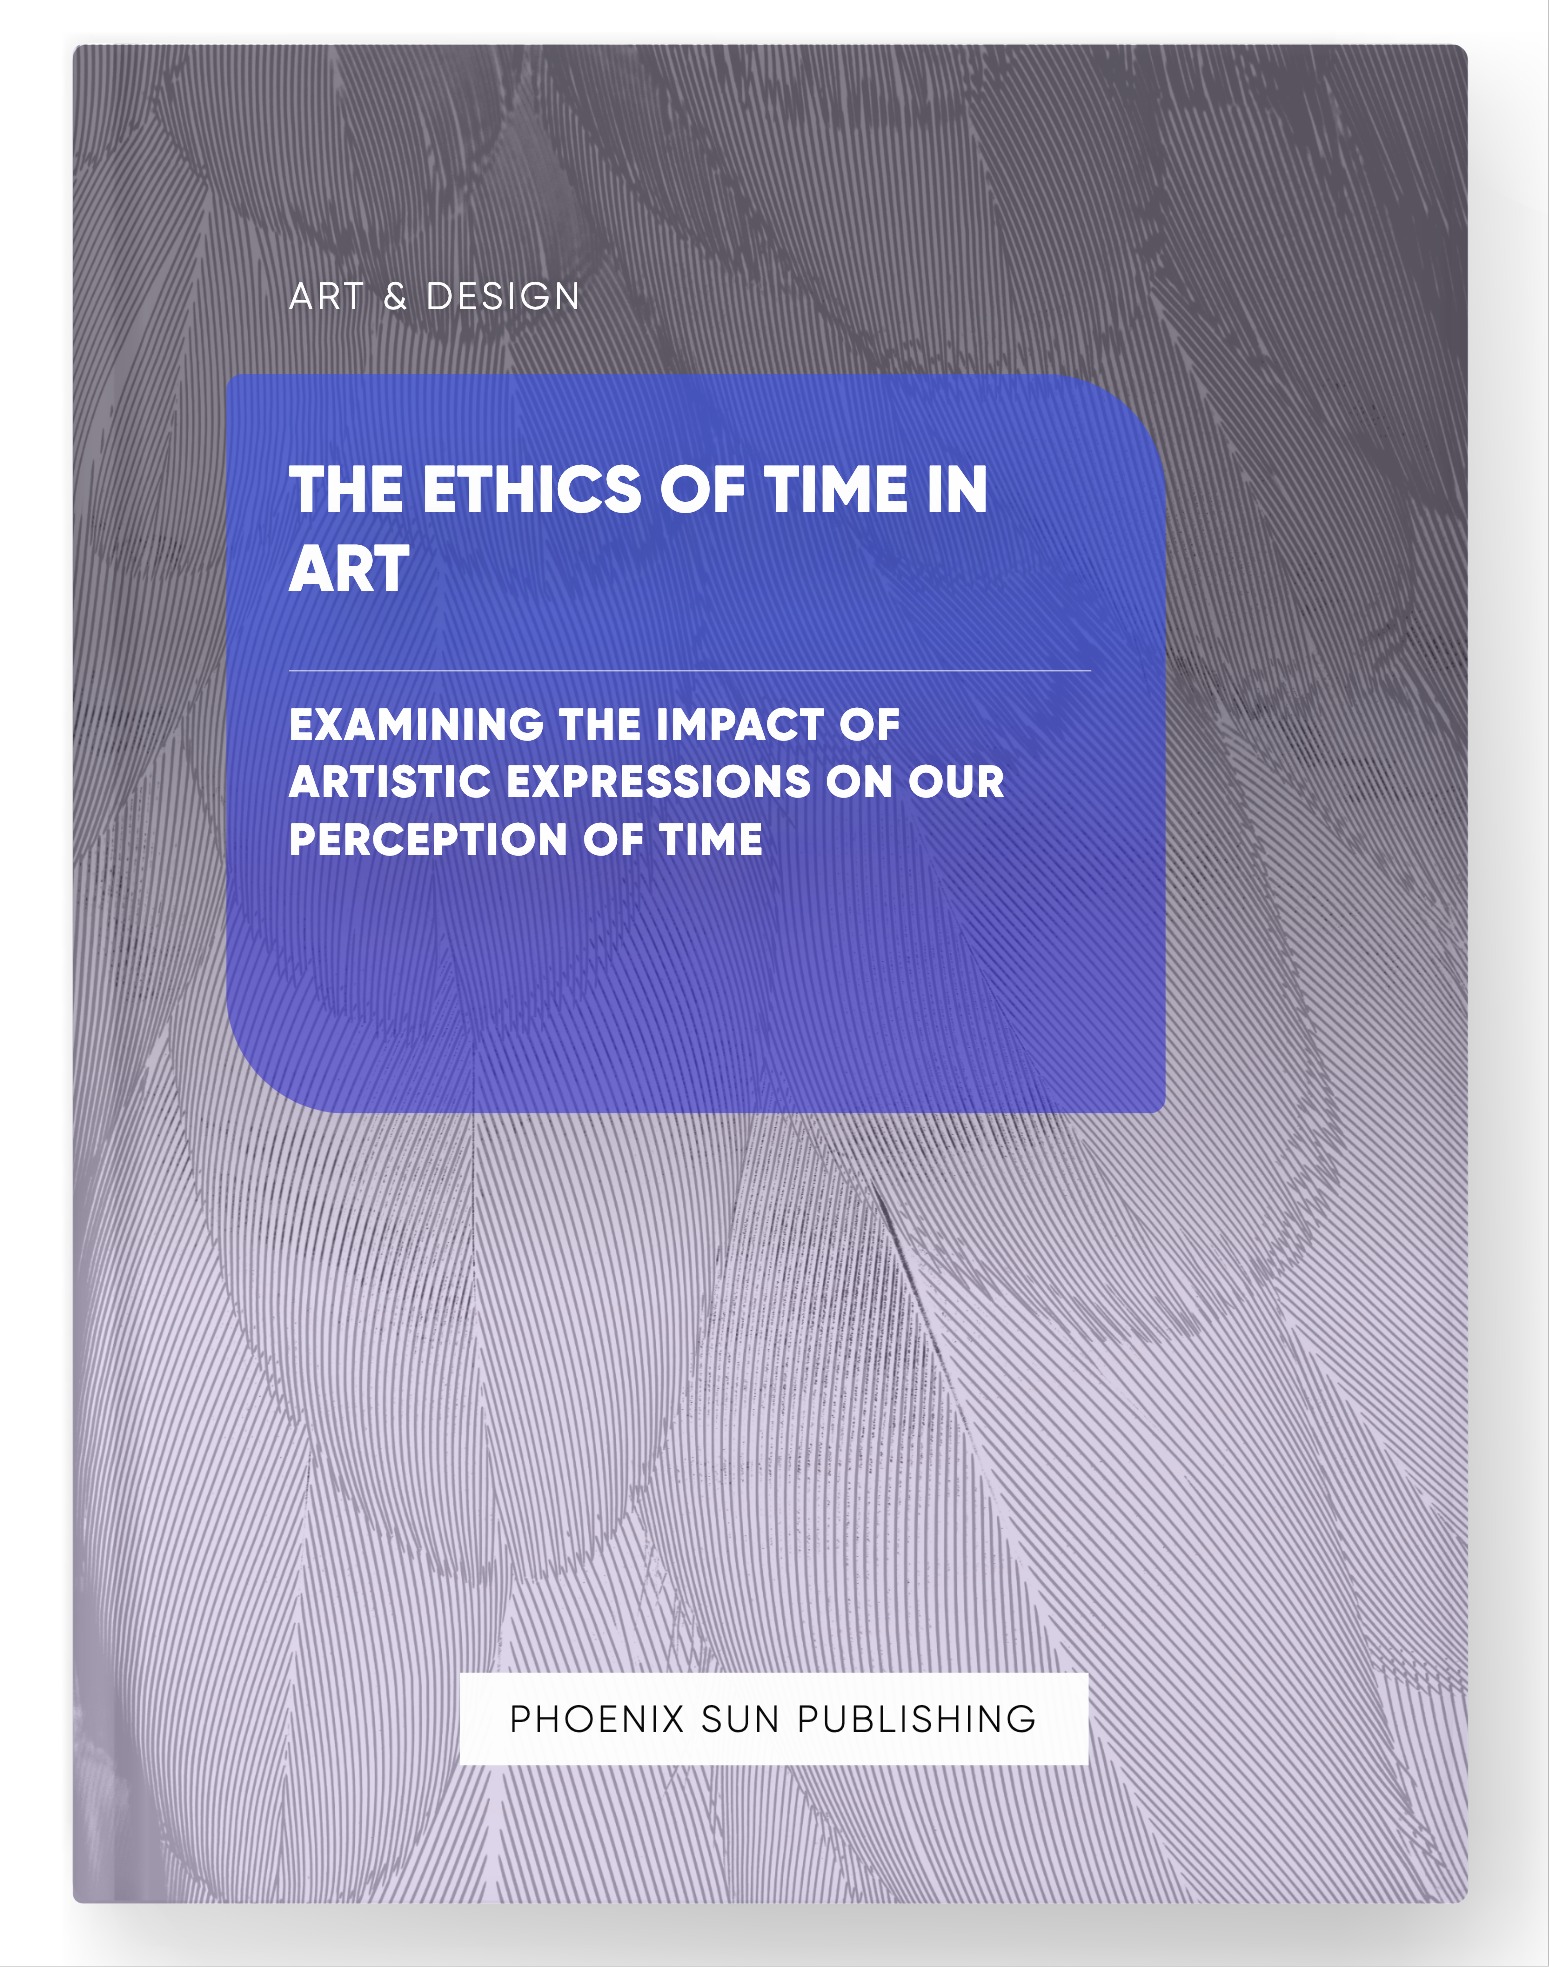 The Ethics of Time in Art – Examining the Impact of Artistic Expressions on our Perception of Time